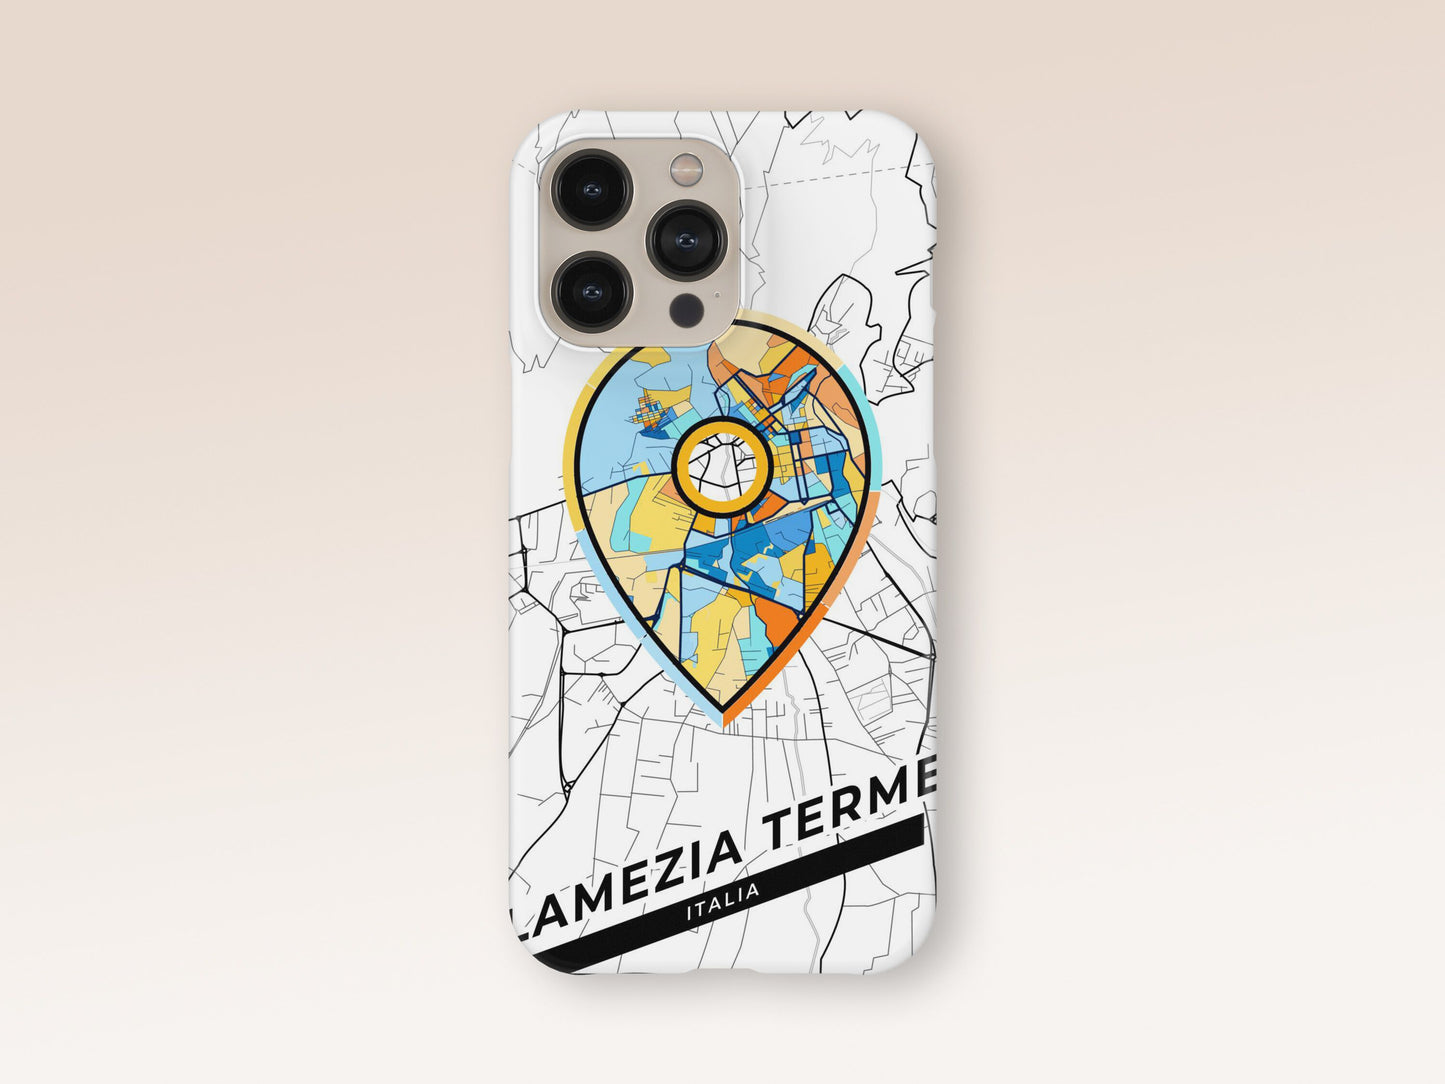 Lamezia Terme Italy slim phone case with colorful icon. Birthday, wedding or housewarming gift. Couple match cases. 1